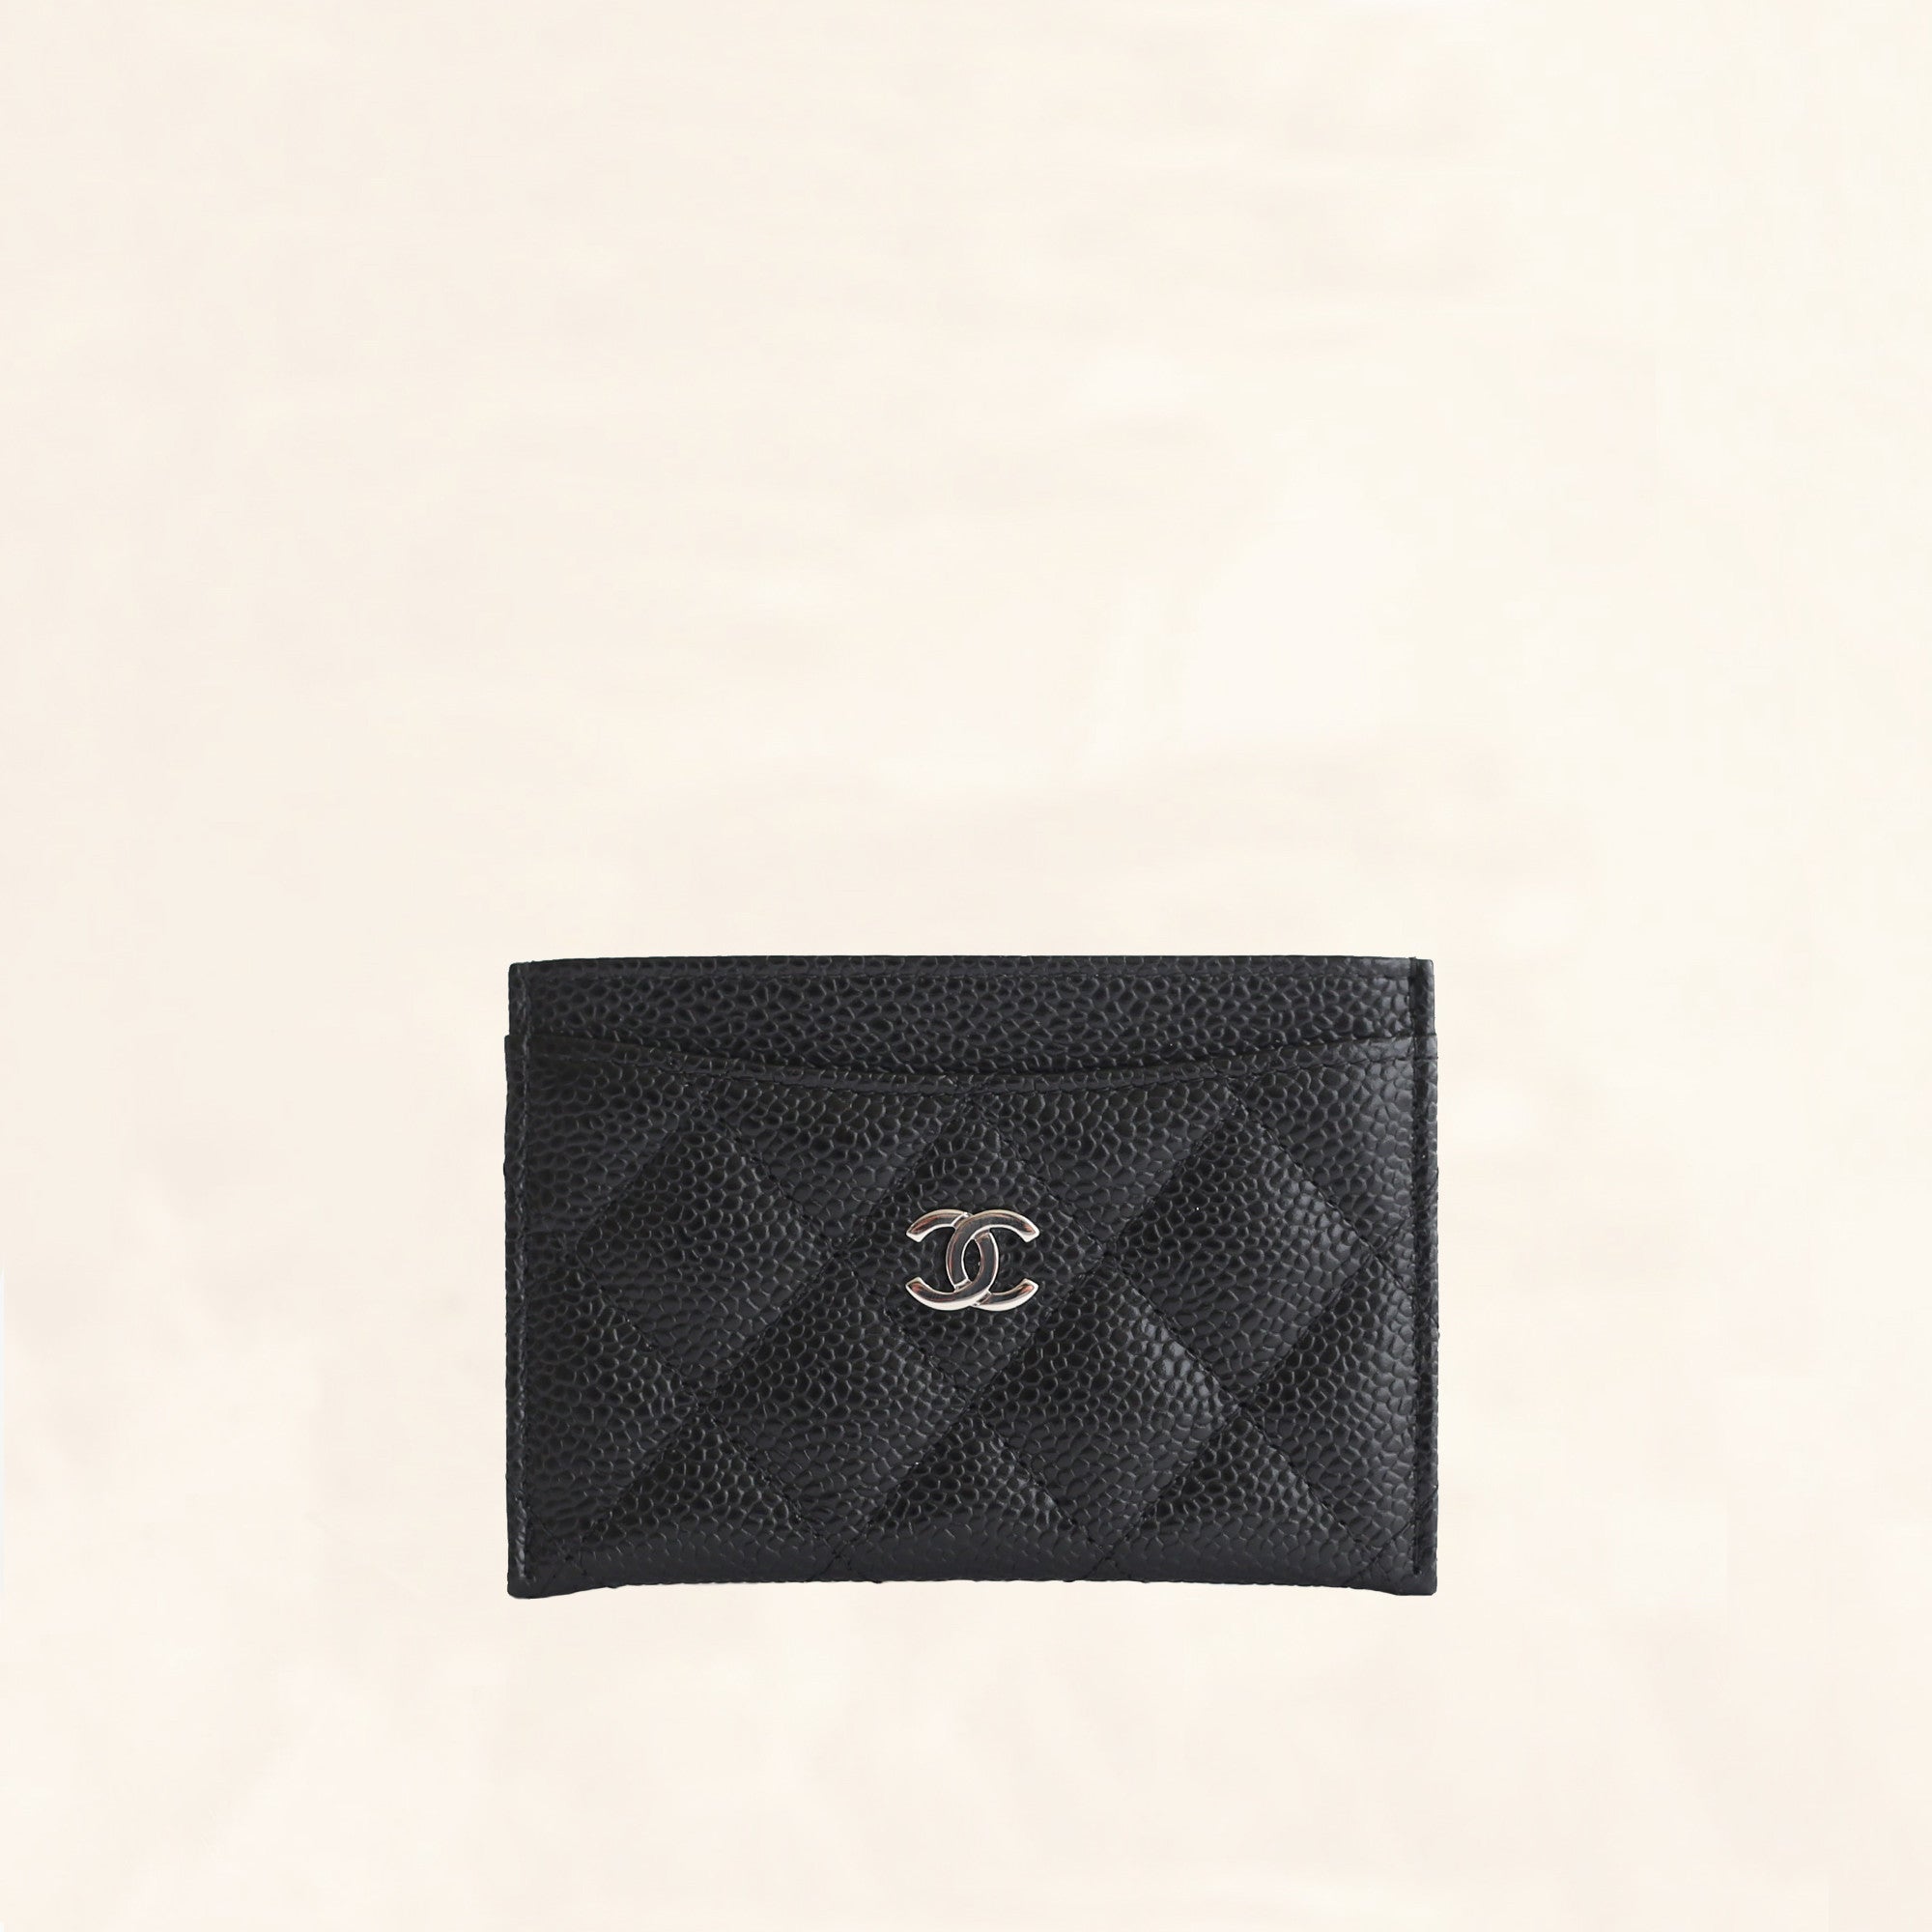 Chanel | Caviar Card Holder with SHW | One Size